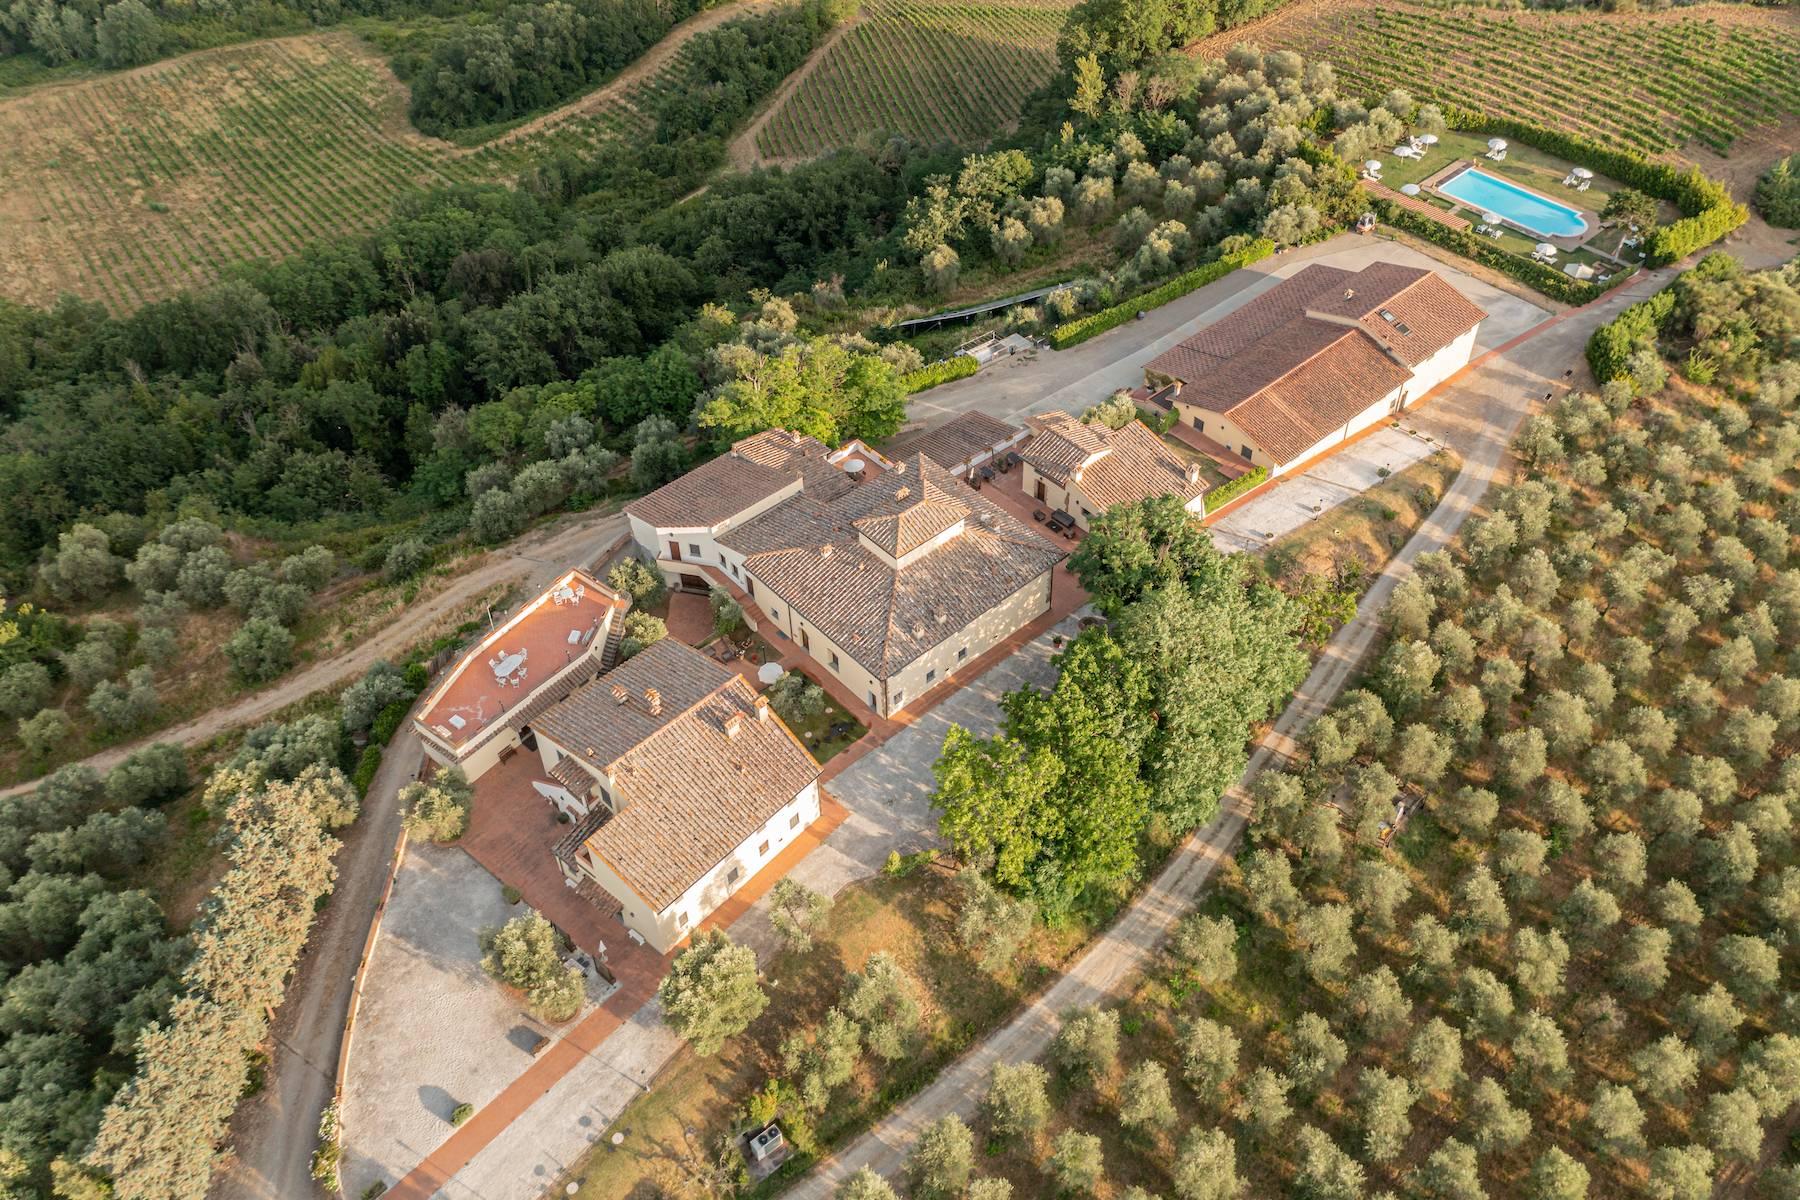 Exceptional 102 hectares wine estate in the heart of Chianti - 2